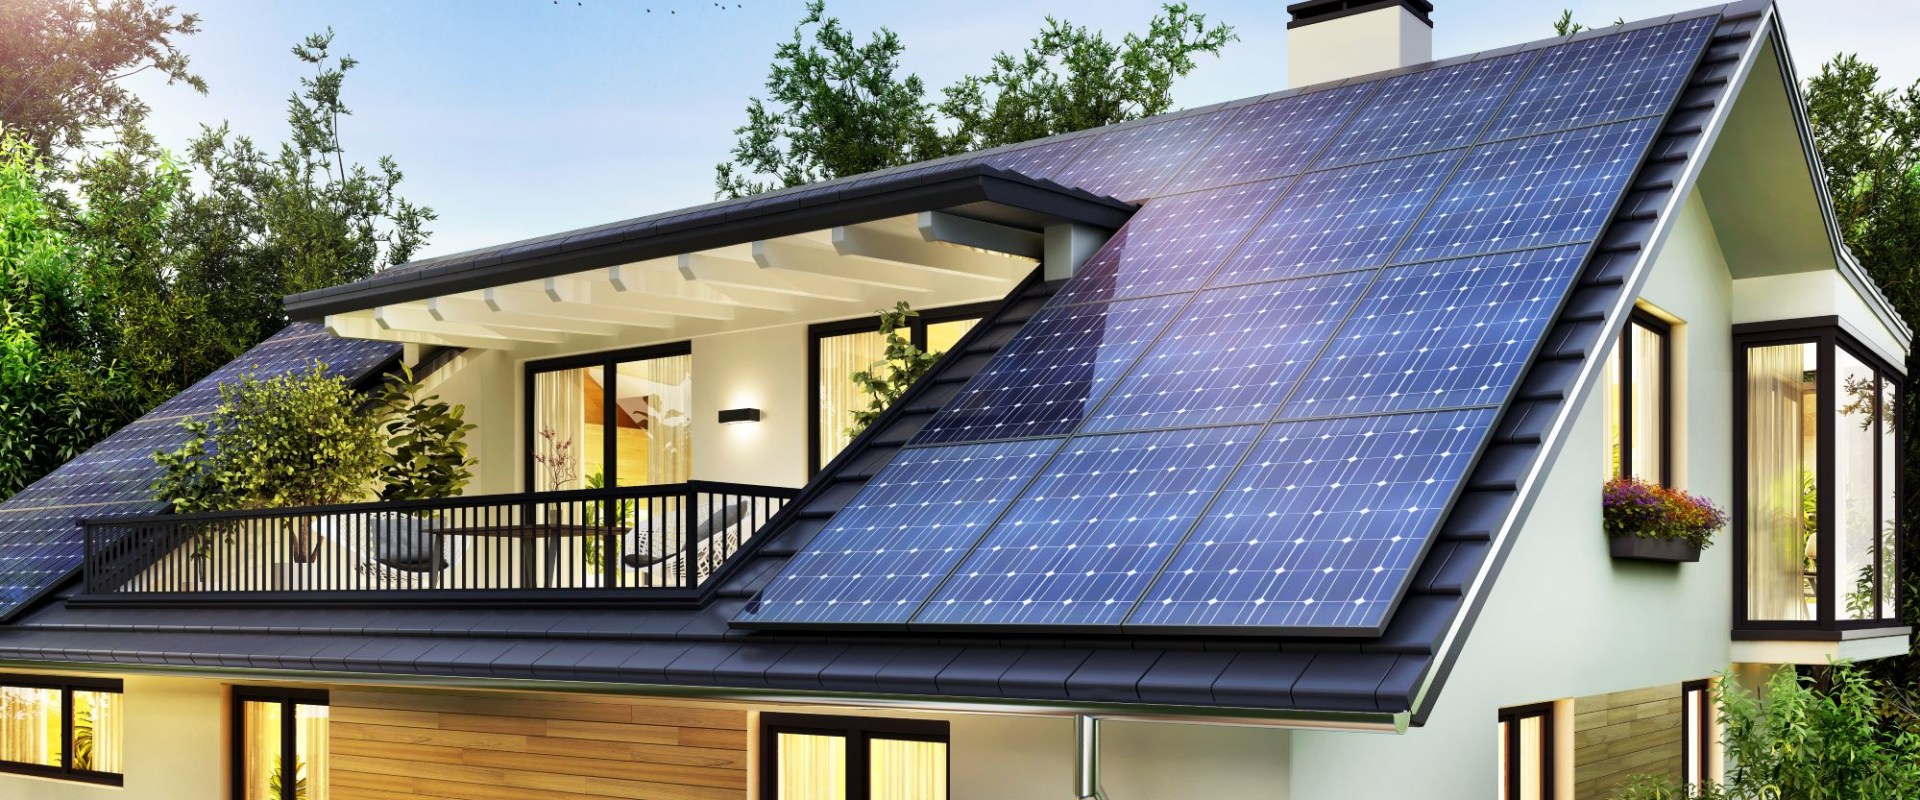 Incorporating Sustainability into Home Design: A Guide to Solar Panels